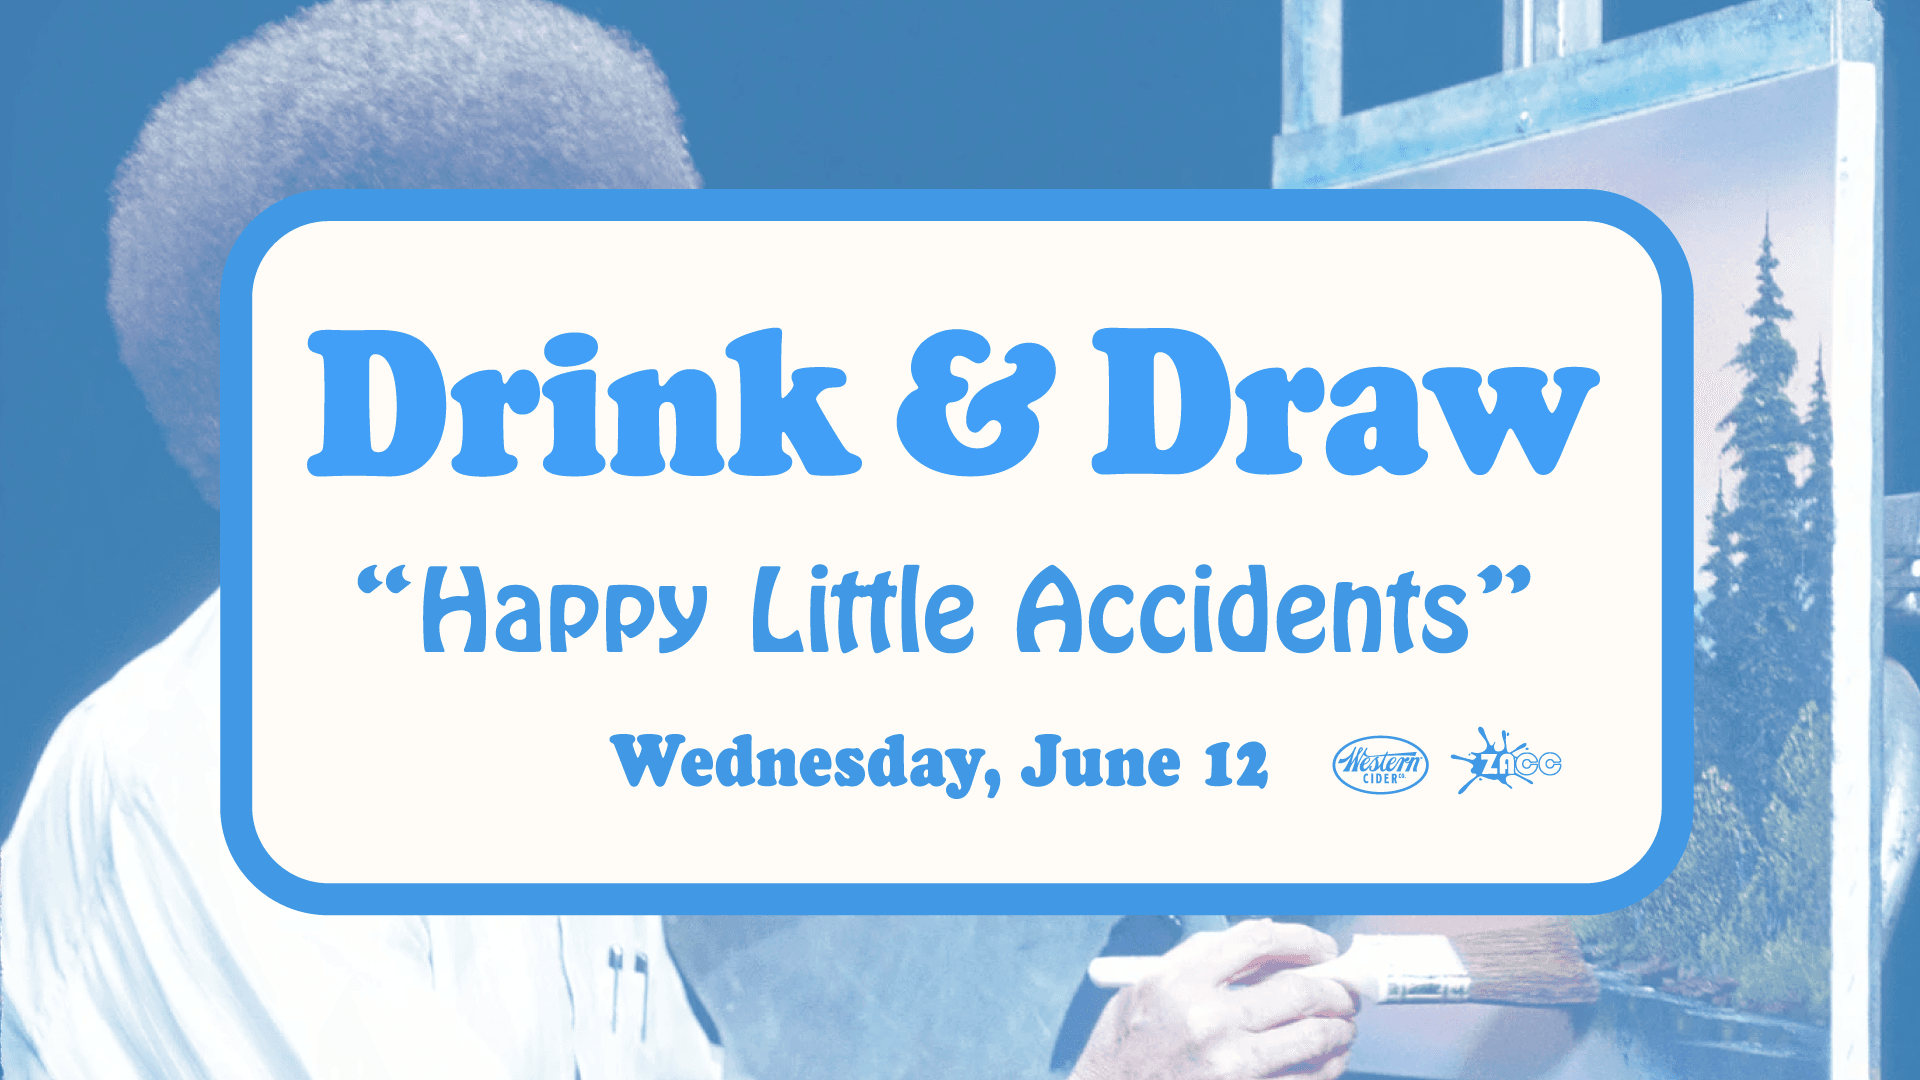 Drink & Draw Happy Little Accidents